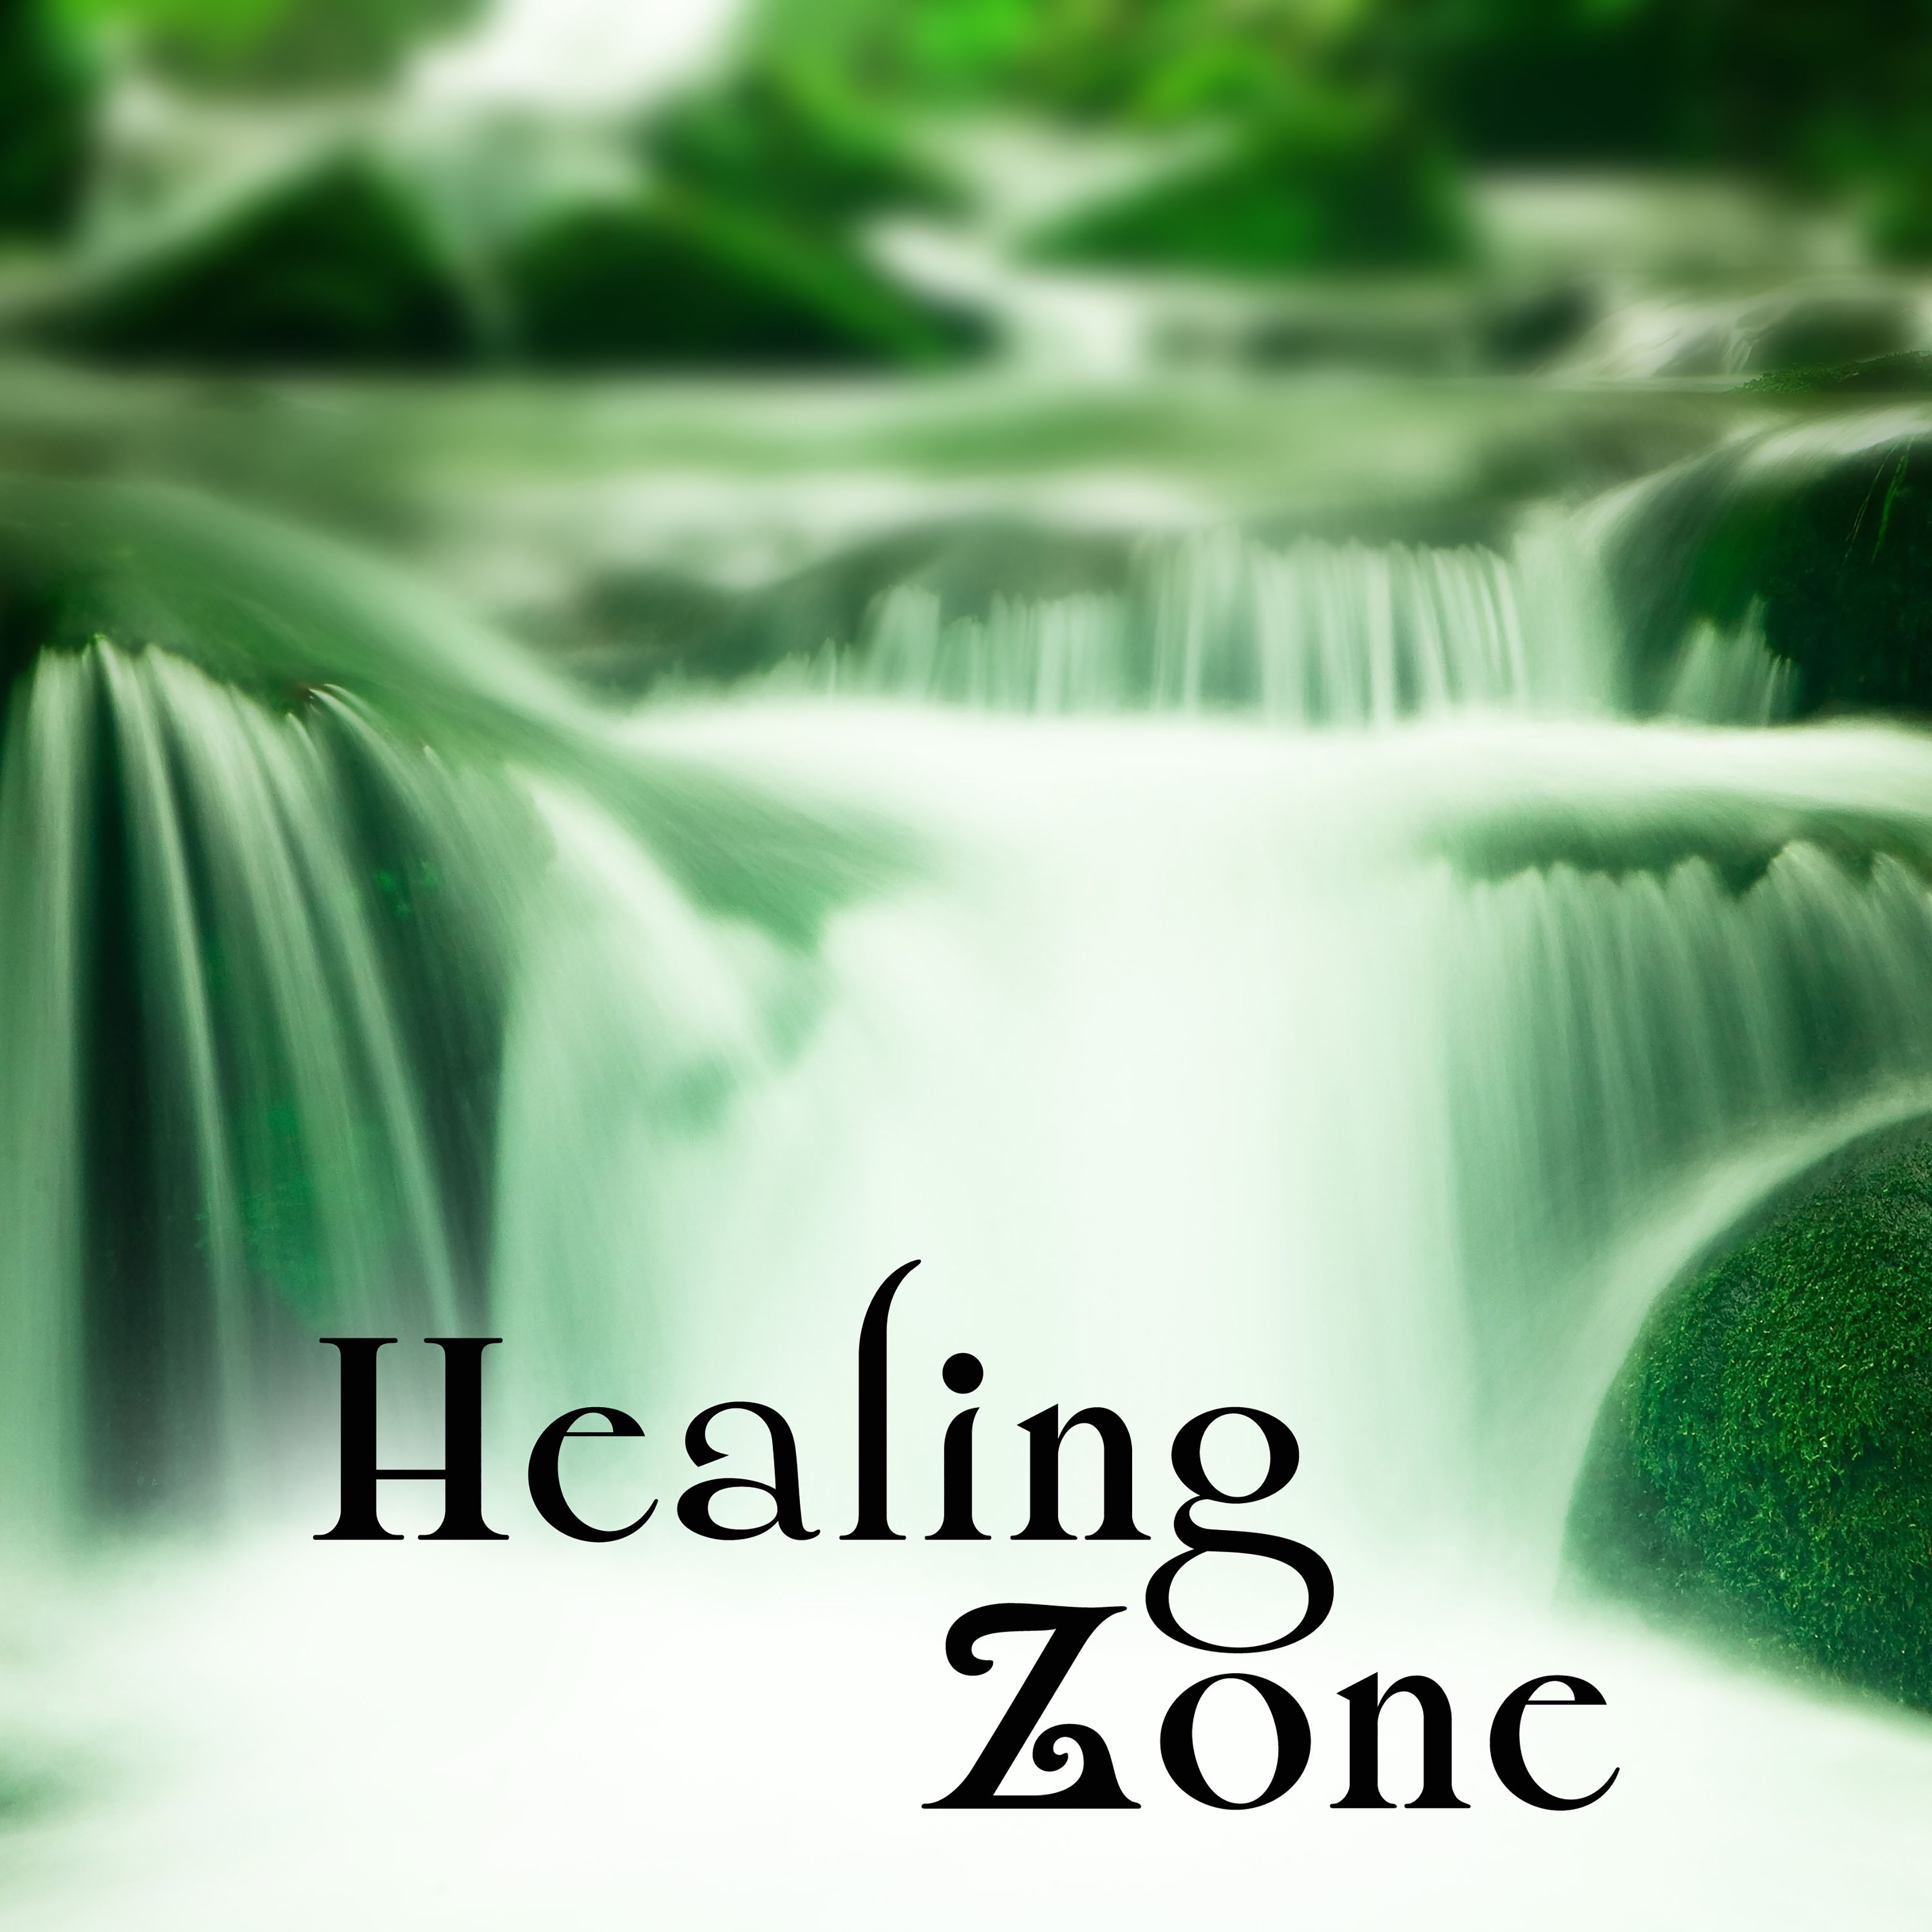 Healing Zone  Deep Relaxation, Tranquility, Relaxation Meditation, Well Being Spa Massage Therapy Music for Calmness